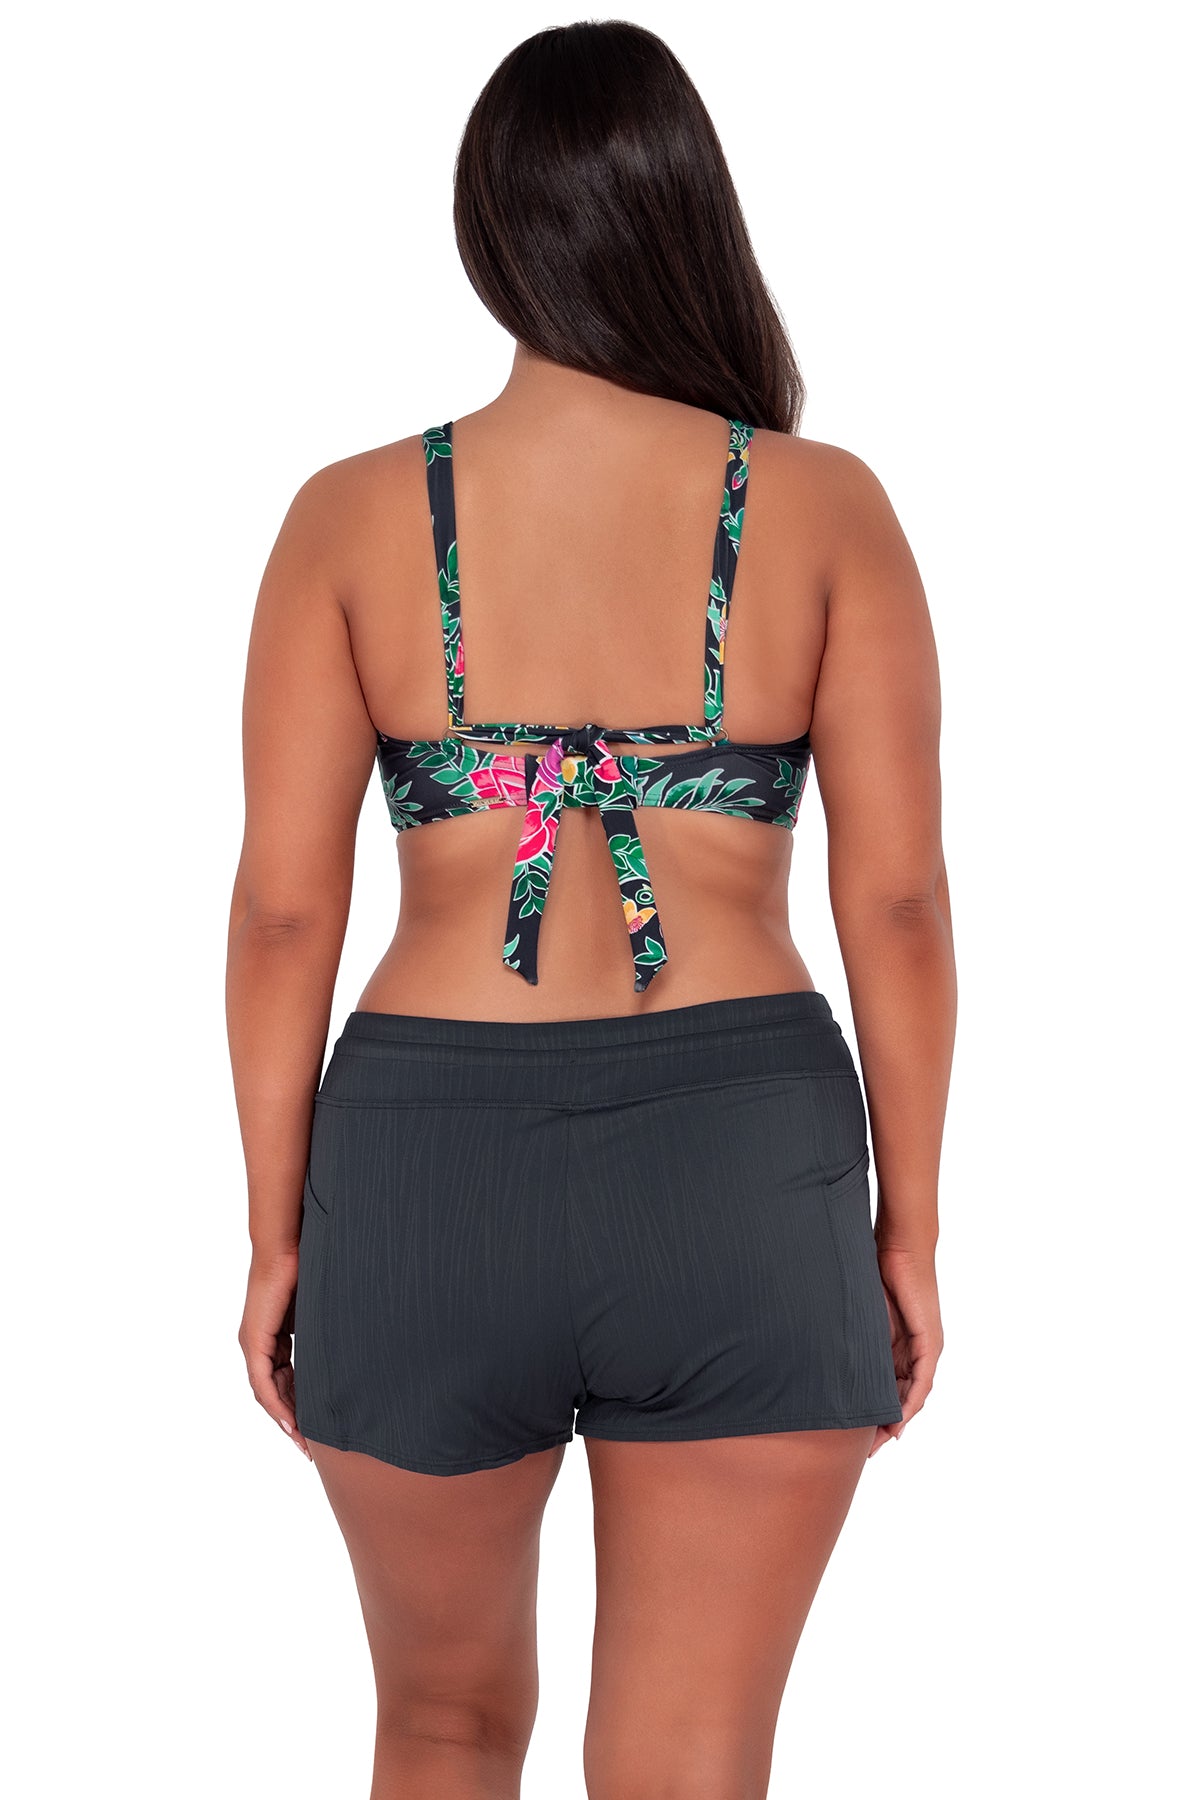 Back pose #1 of Nicki wearing Sunsets Twilight Blooms Vienna V-Wire Top paired with Laguna Swim Short women's casual wear